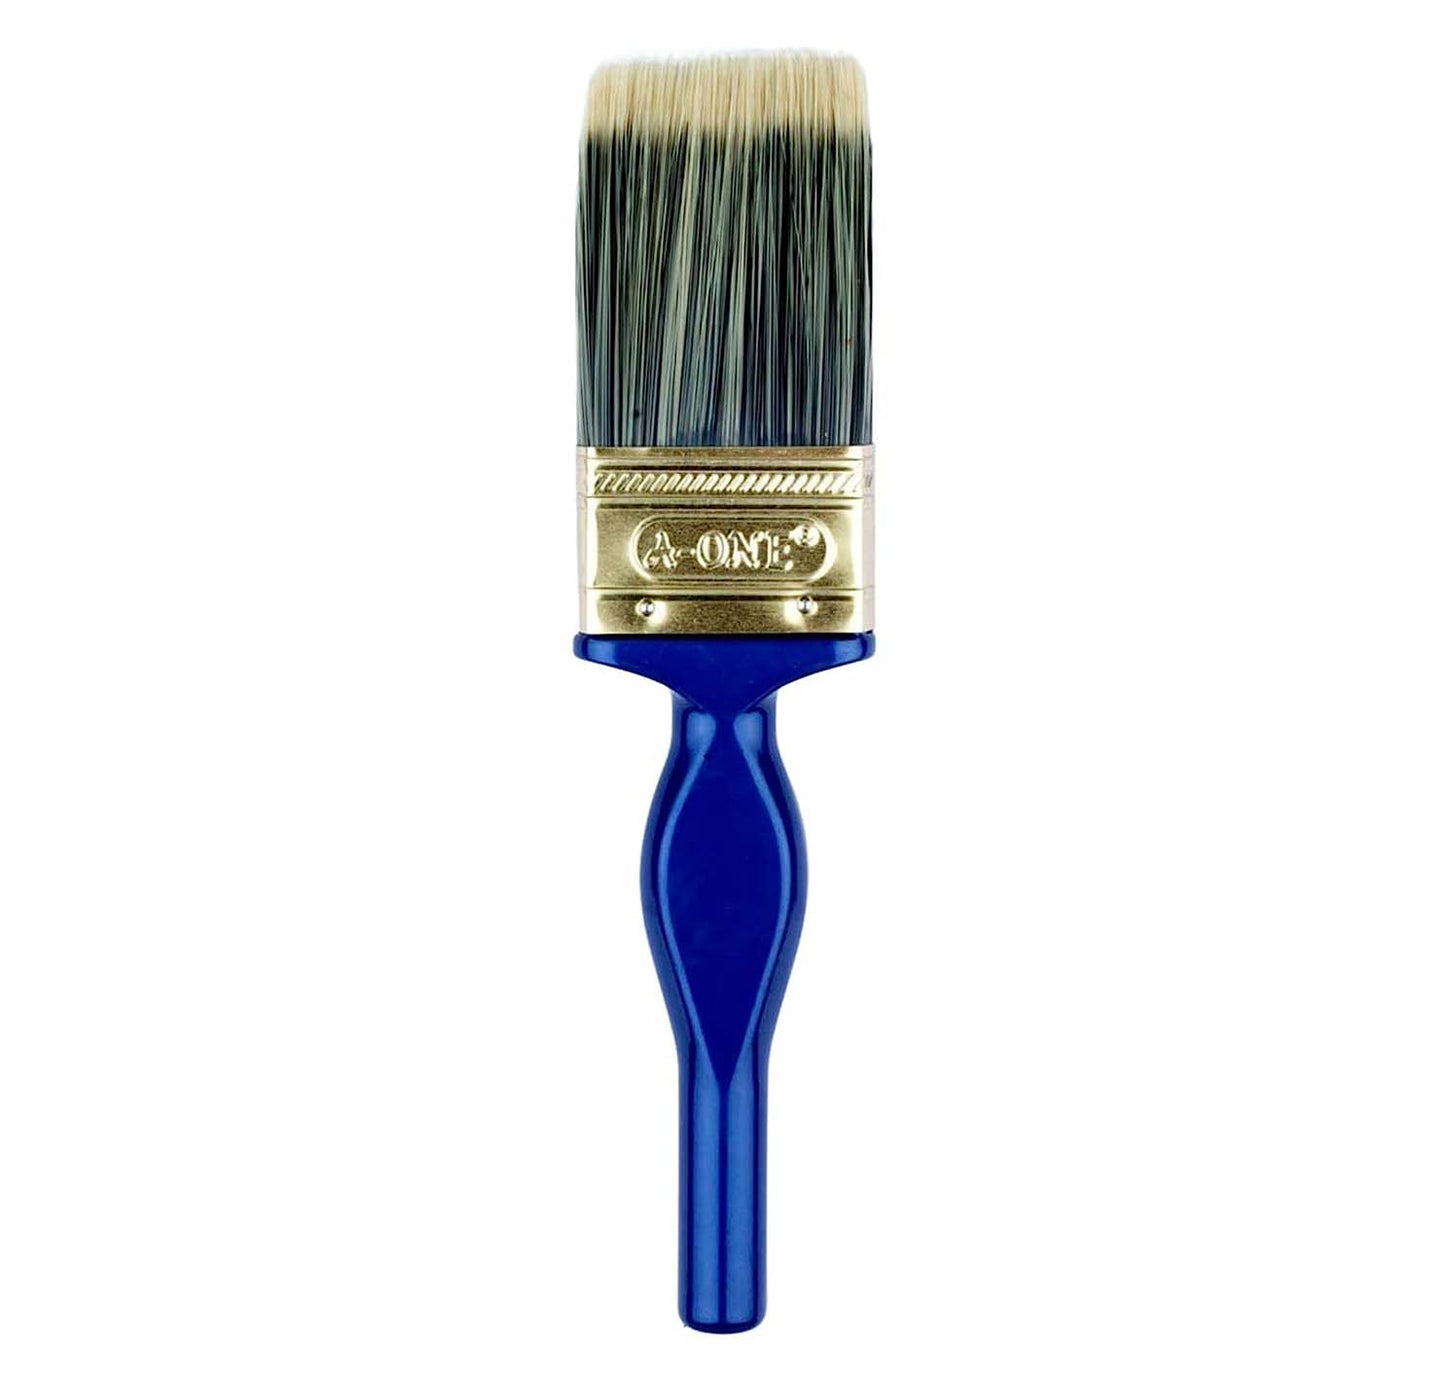 A-One Wall Painting Brush With Wooden Handle - 1", 2", 3", 4"